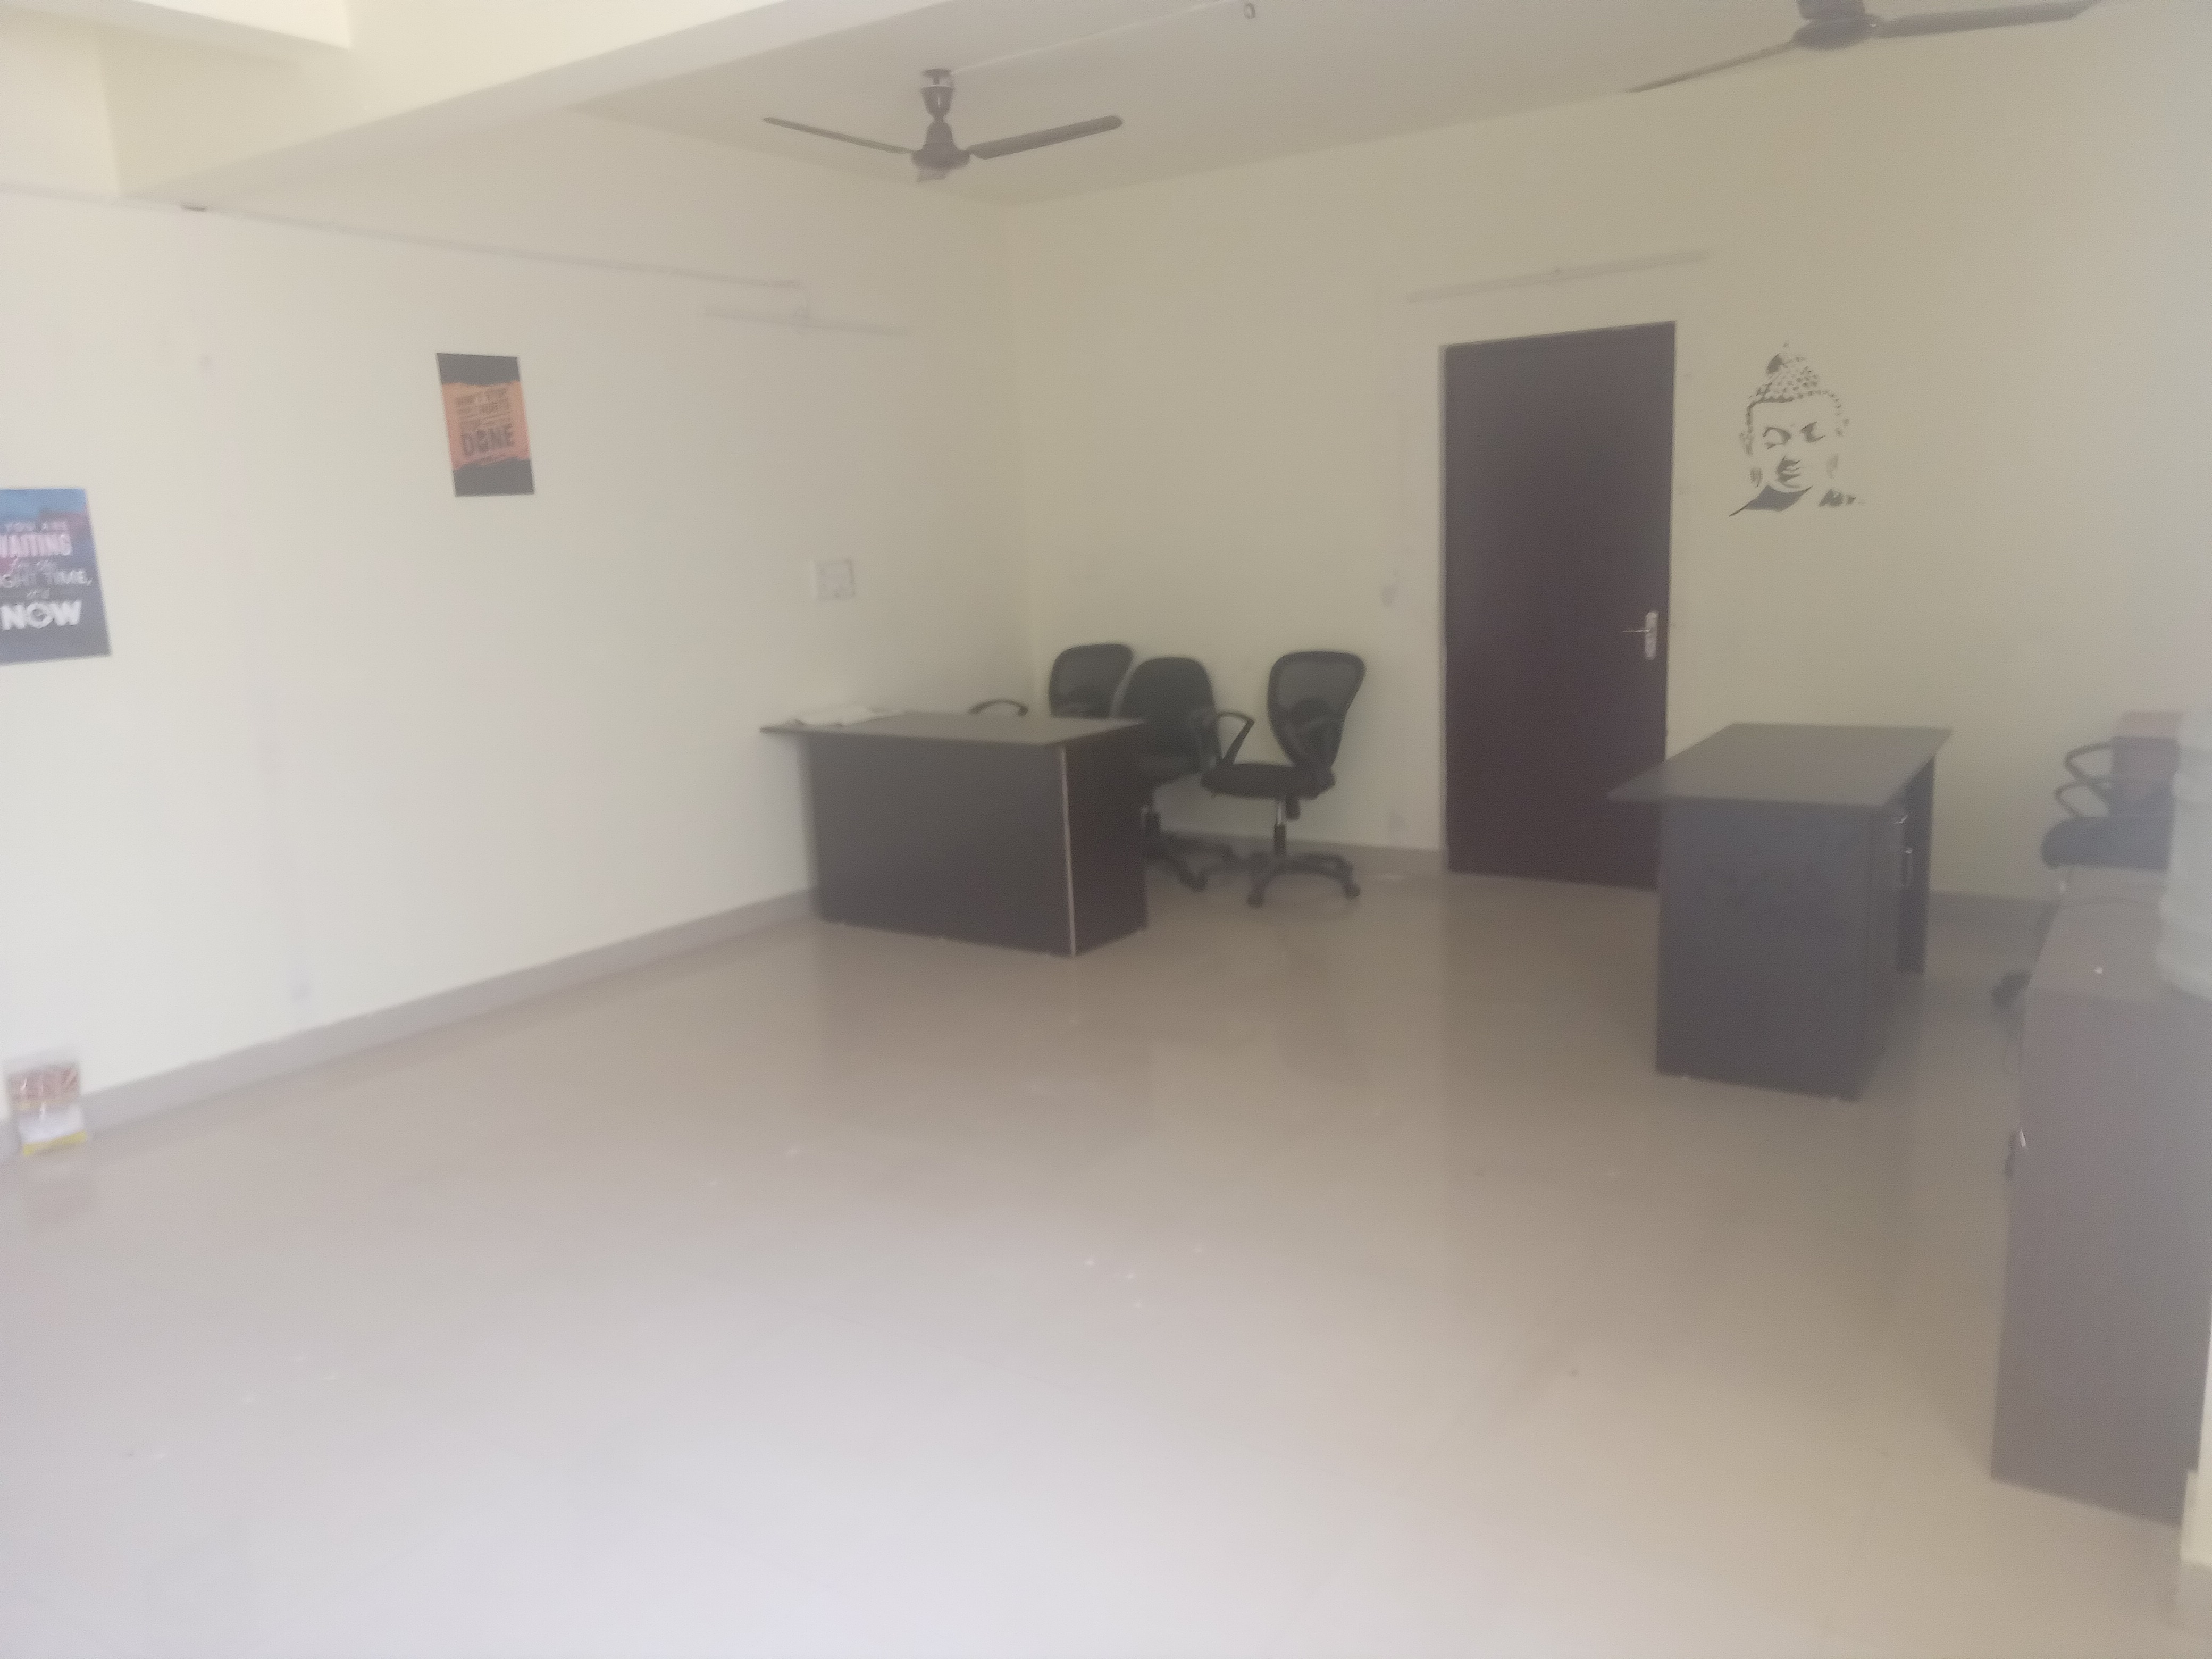 800 Sq Feet Industrial/Commercial Space for Rent Only in Dodda Banaswadi